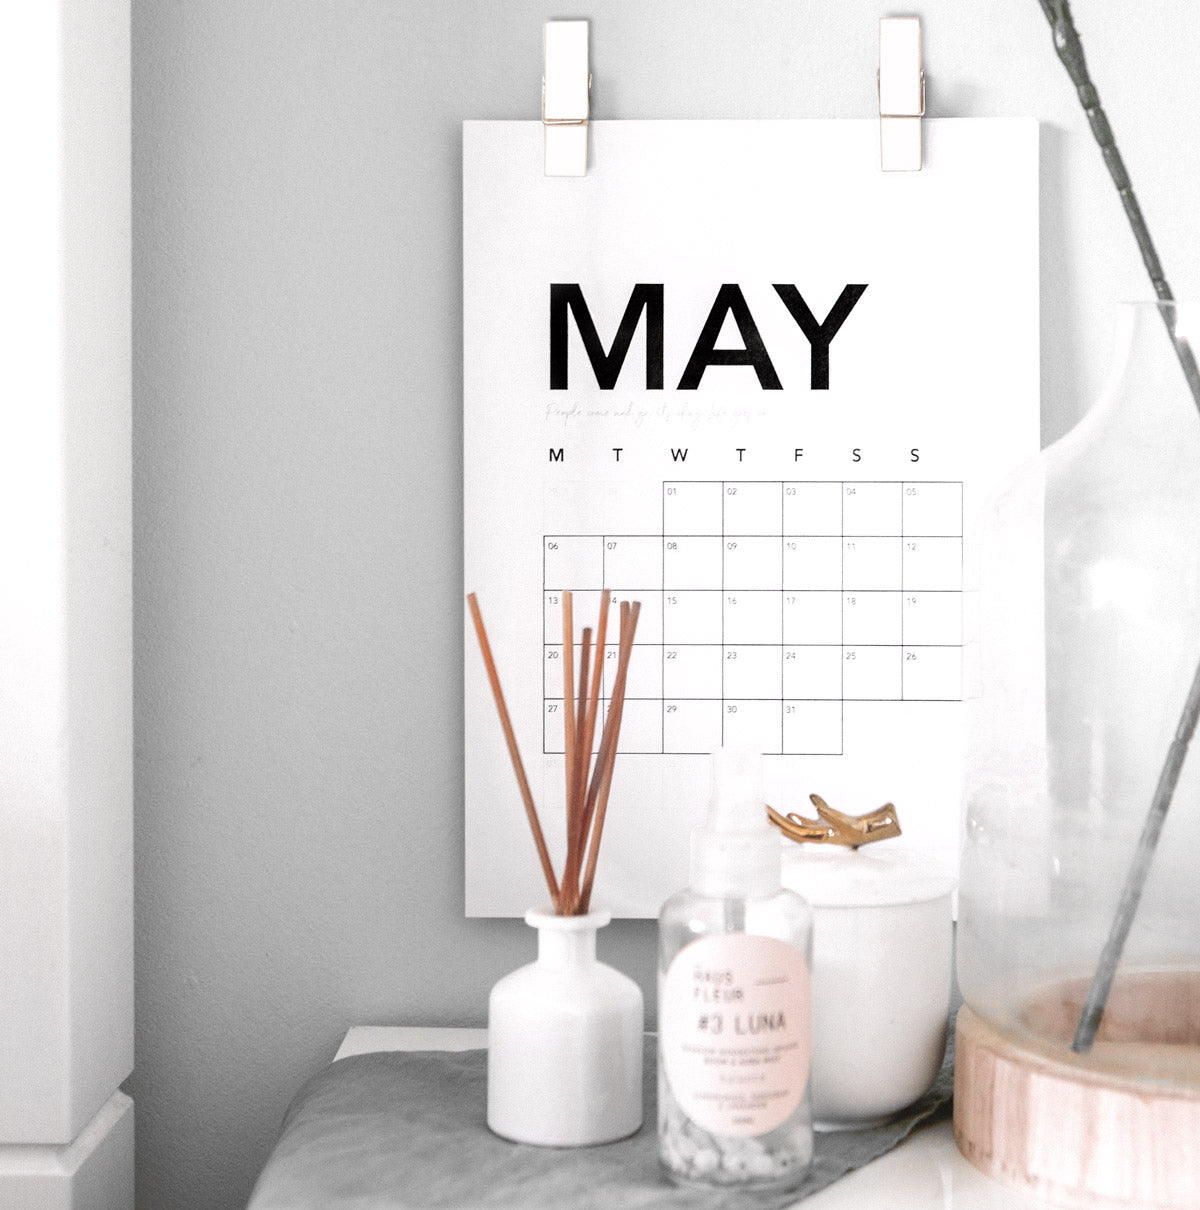 Pair of wooden spring clips on a wall, hanging a calendar